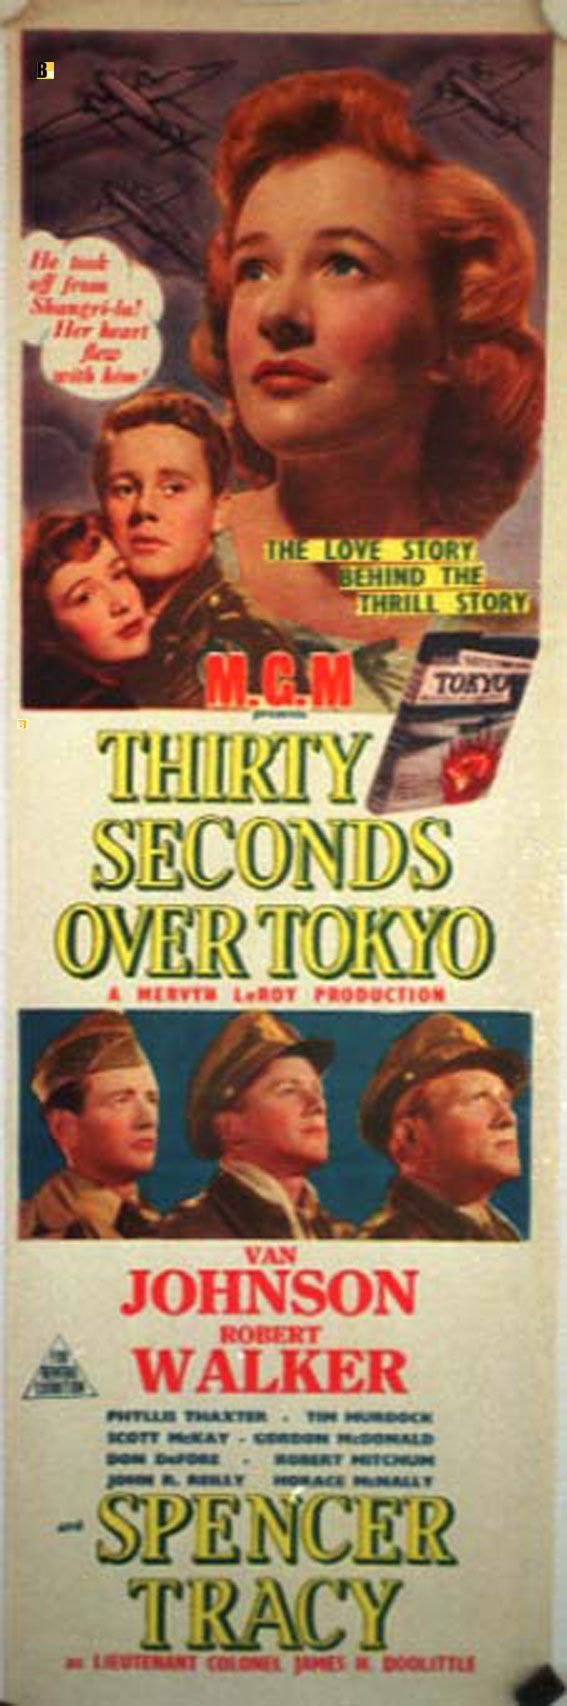 THIRTY SECONDS OVER TOKUO